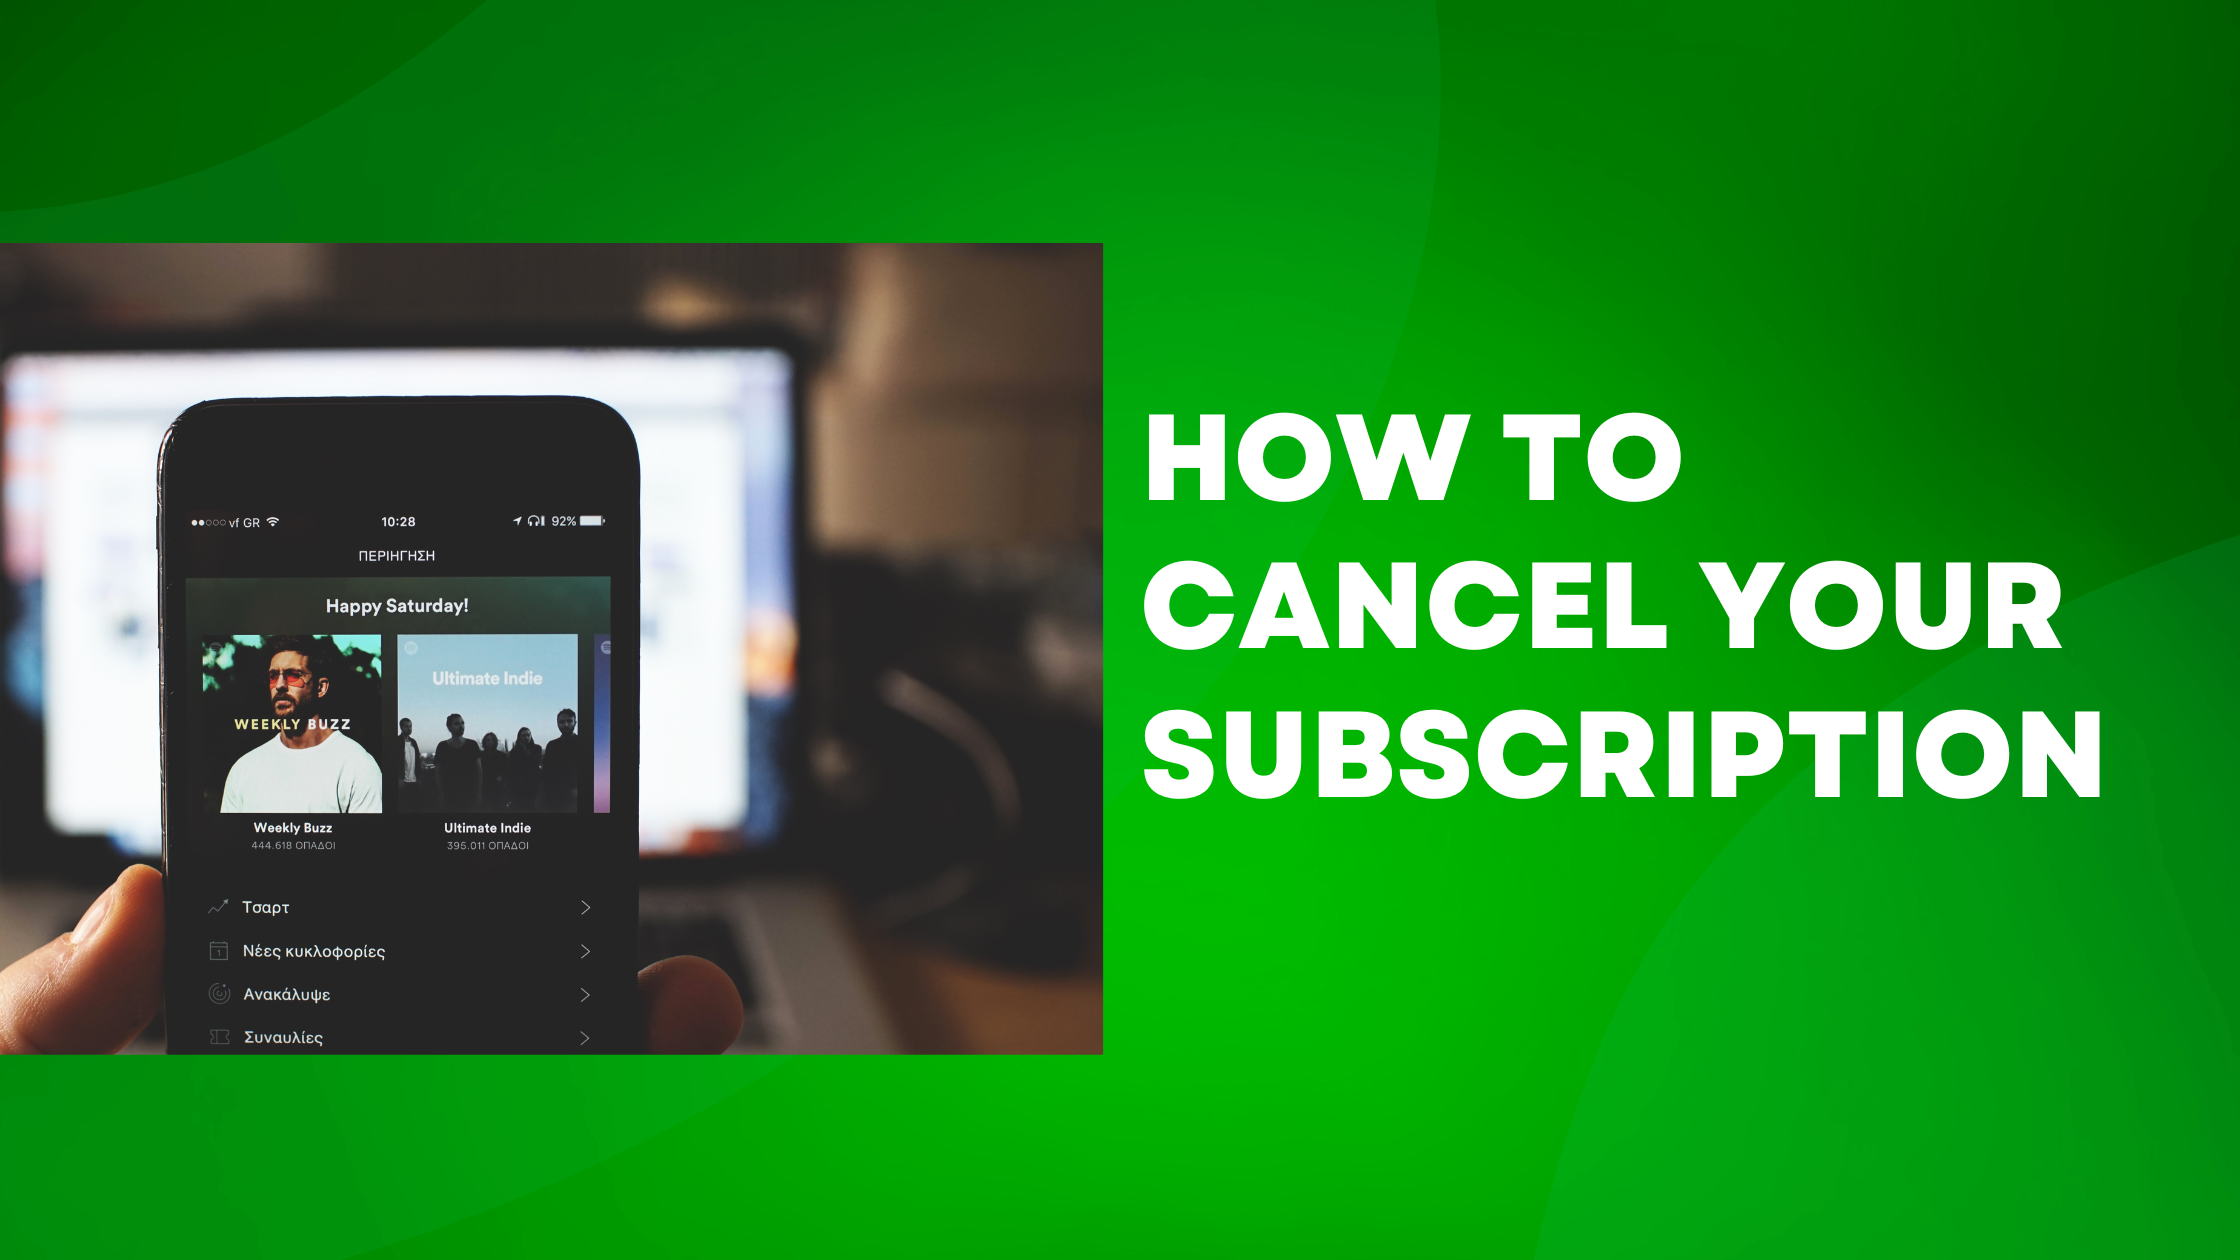 How To Cancel Your Subscription